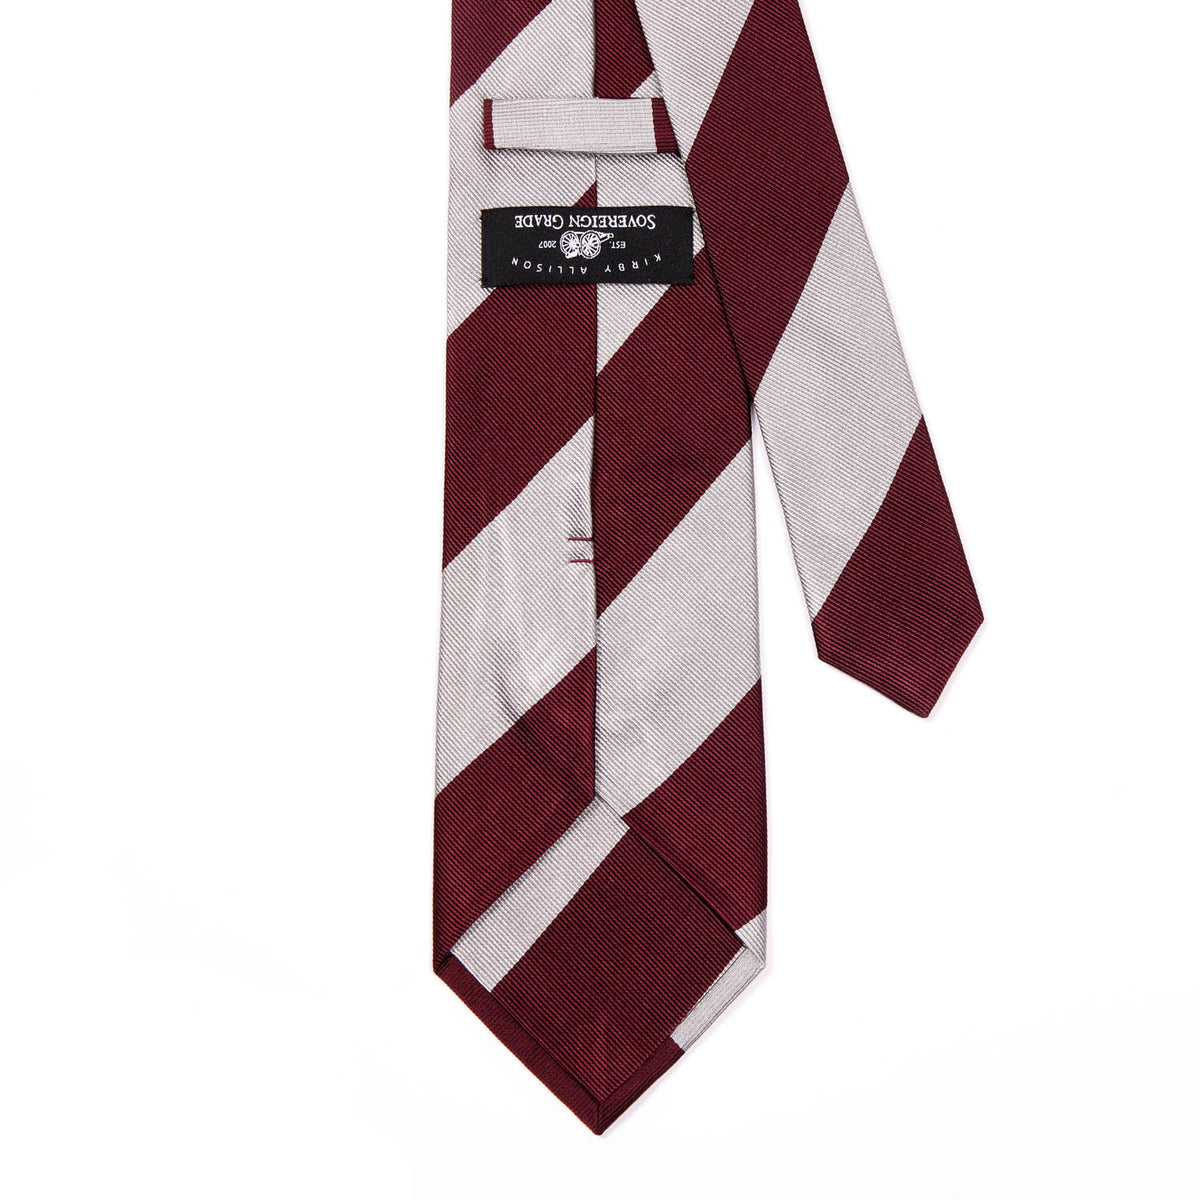 A Sovereign Grade Oxblood Wide Rep Tie, 150cm from KirbyAllison.com, on a white background, from the United Kingdom.